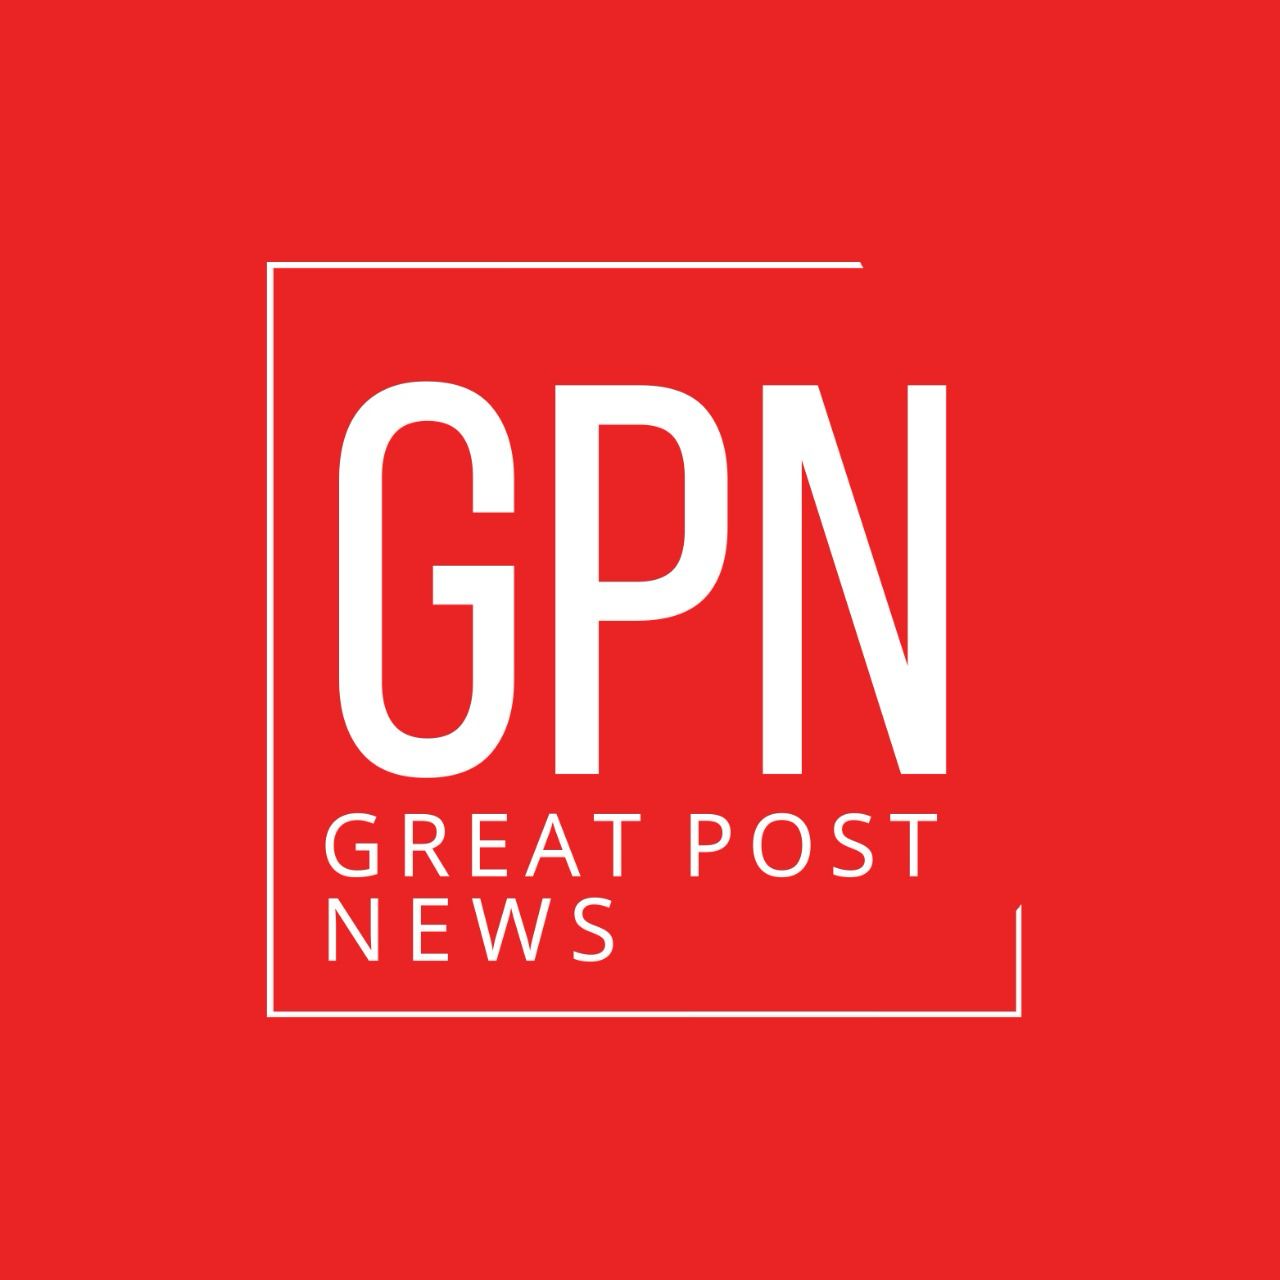 GPN (Greate post news)